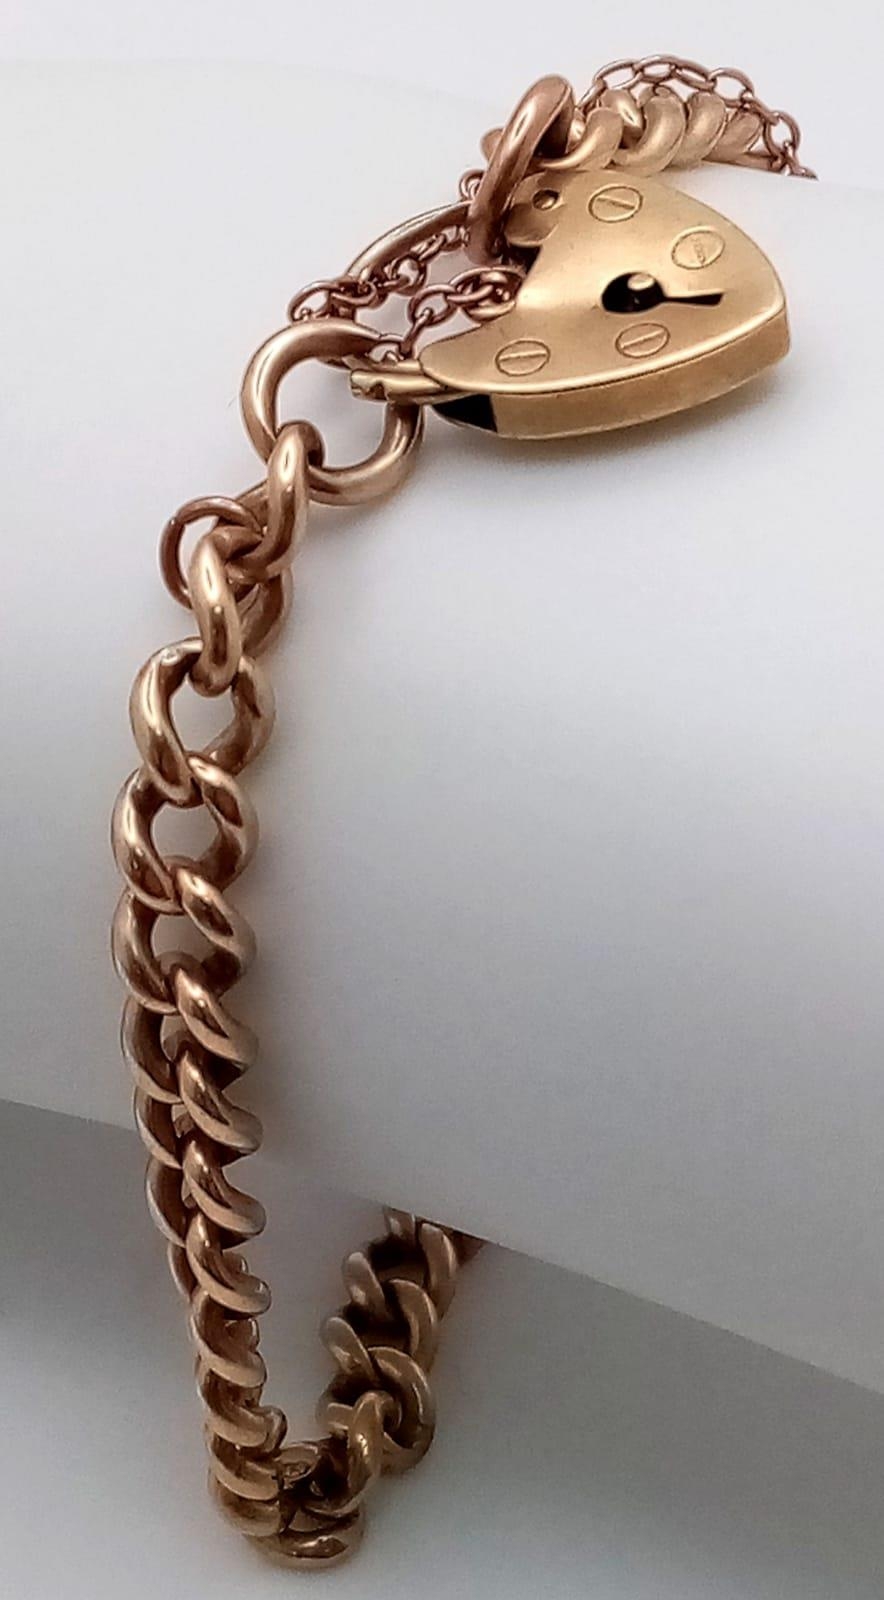 A Vintage 9K Yellow Gold Curb Link Bracelet with Heart Clasp. 20cm. 15.7g weight. - Image 2 of 3